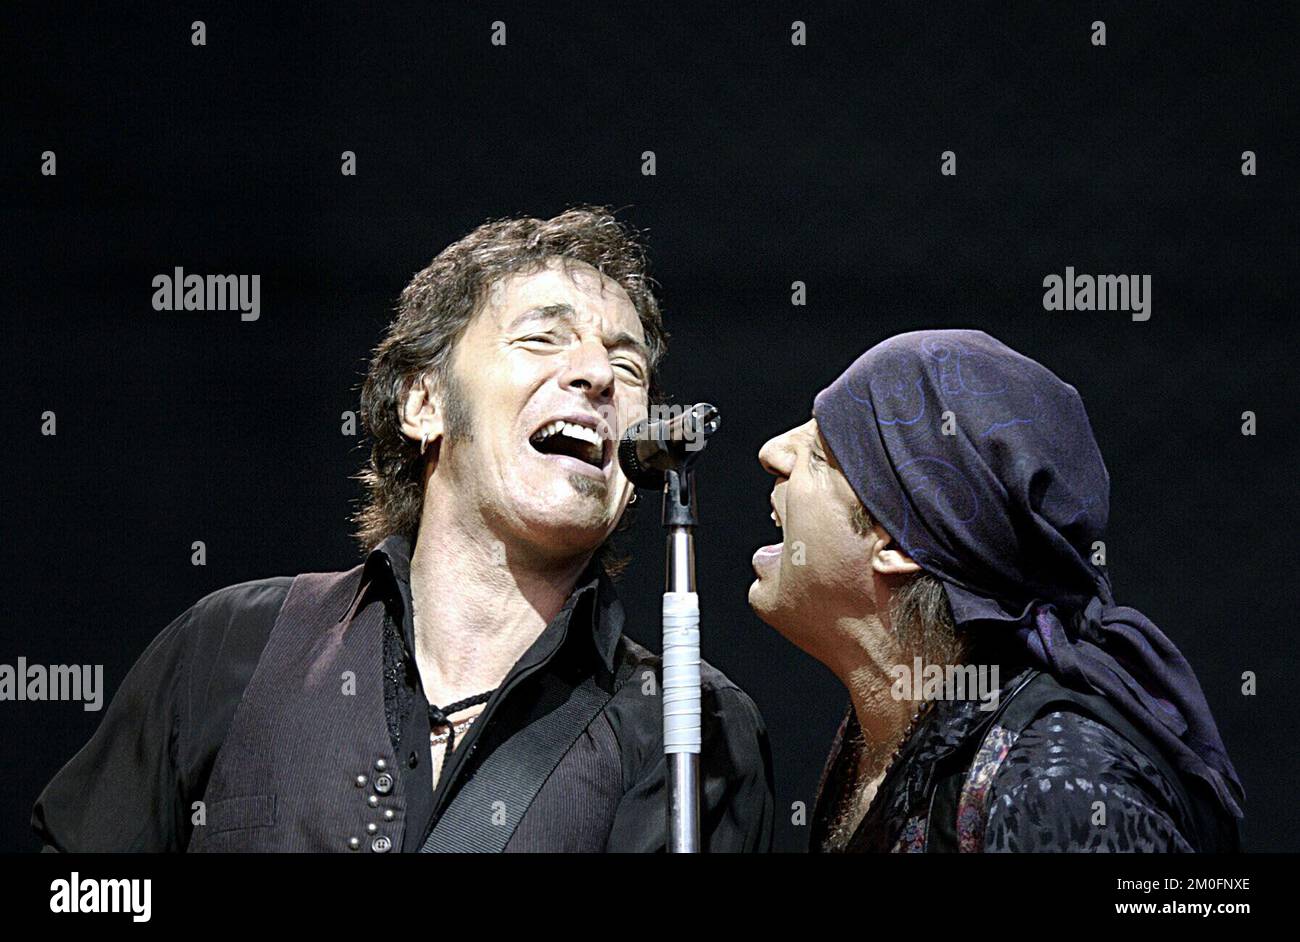 PA PHOTOS/POLFOTO - UK USE ONLY: Bruce Springsteen and the E street band played in 'Parken' Saturday night. The concert was sold out, and the boss and his band did not let anybody down. They kept it going for over three hours. Picture shows Bruce Springsteen and Little Steven (Steven Van Zandt). Stock Photo